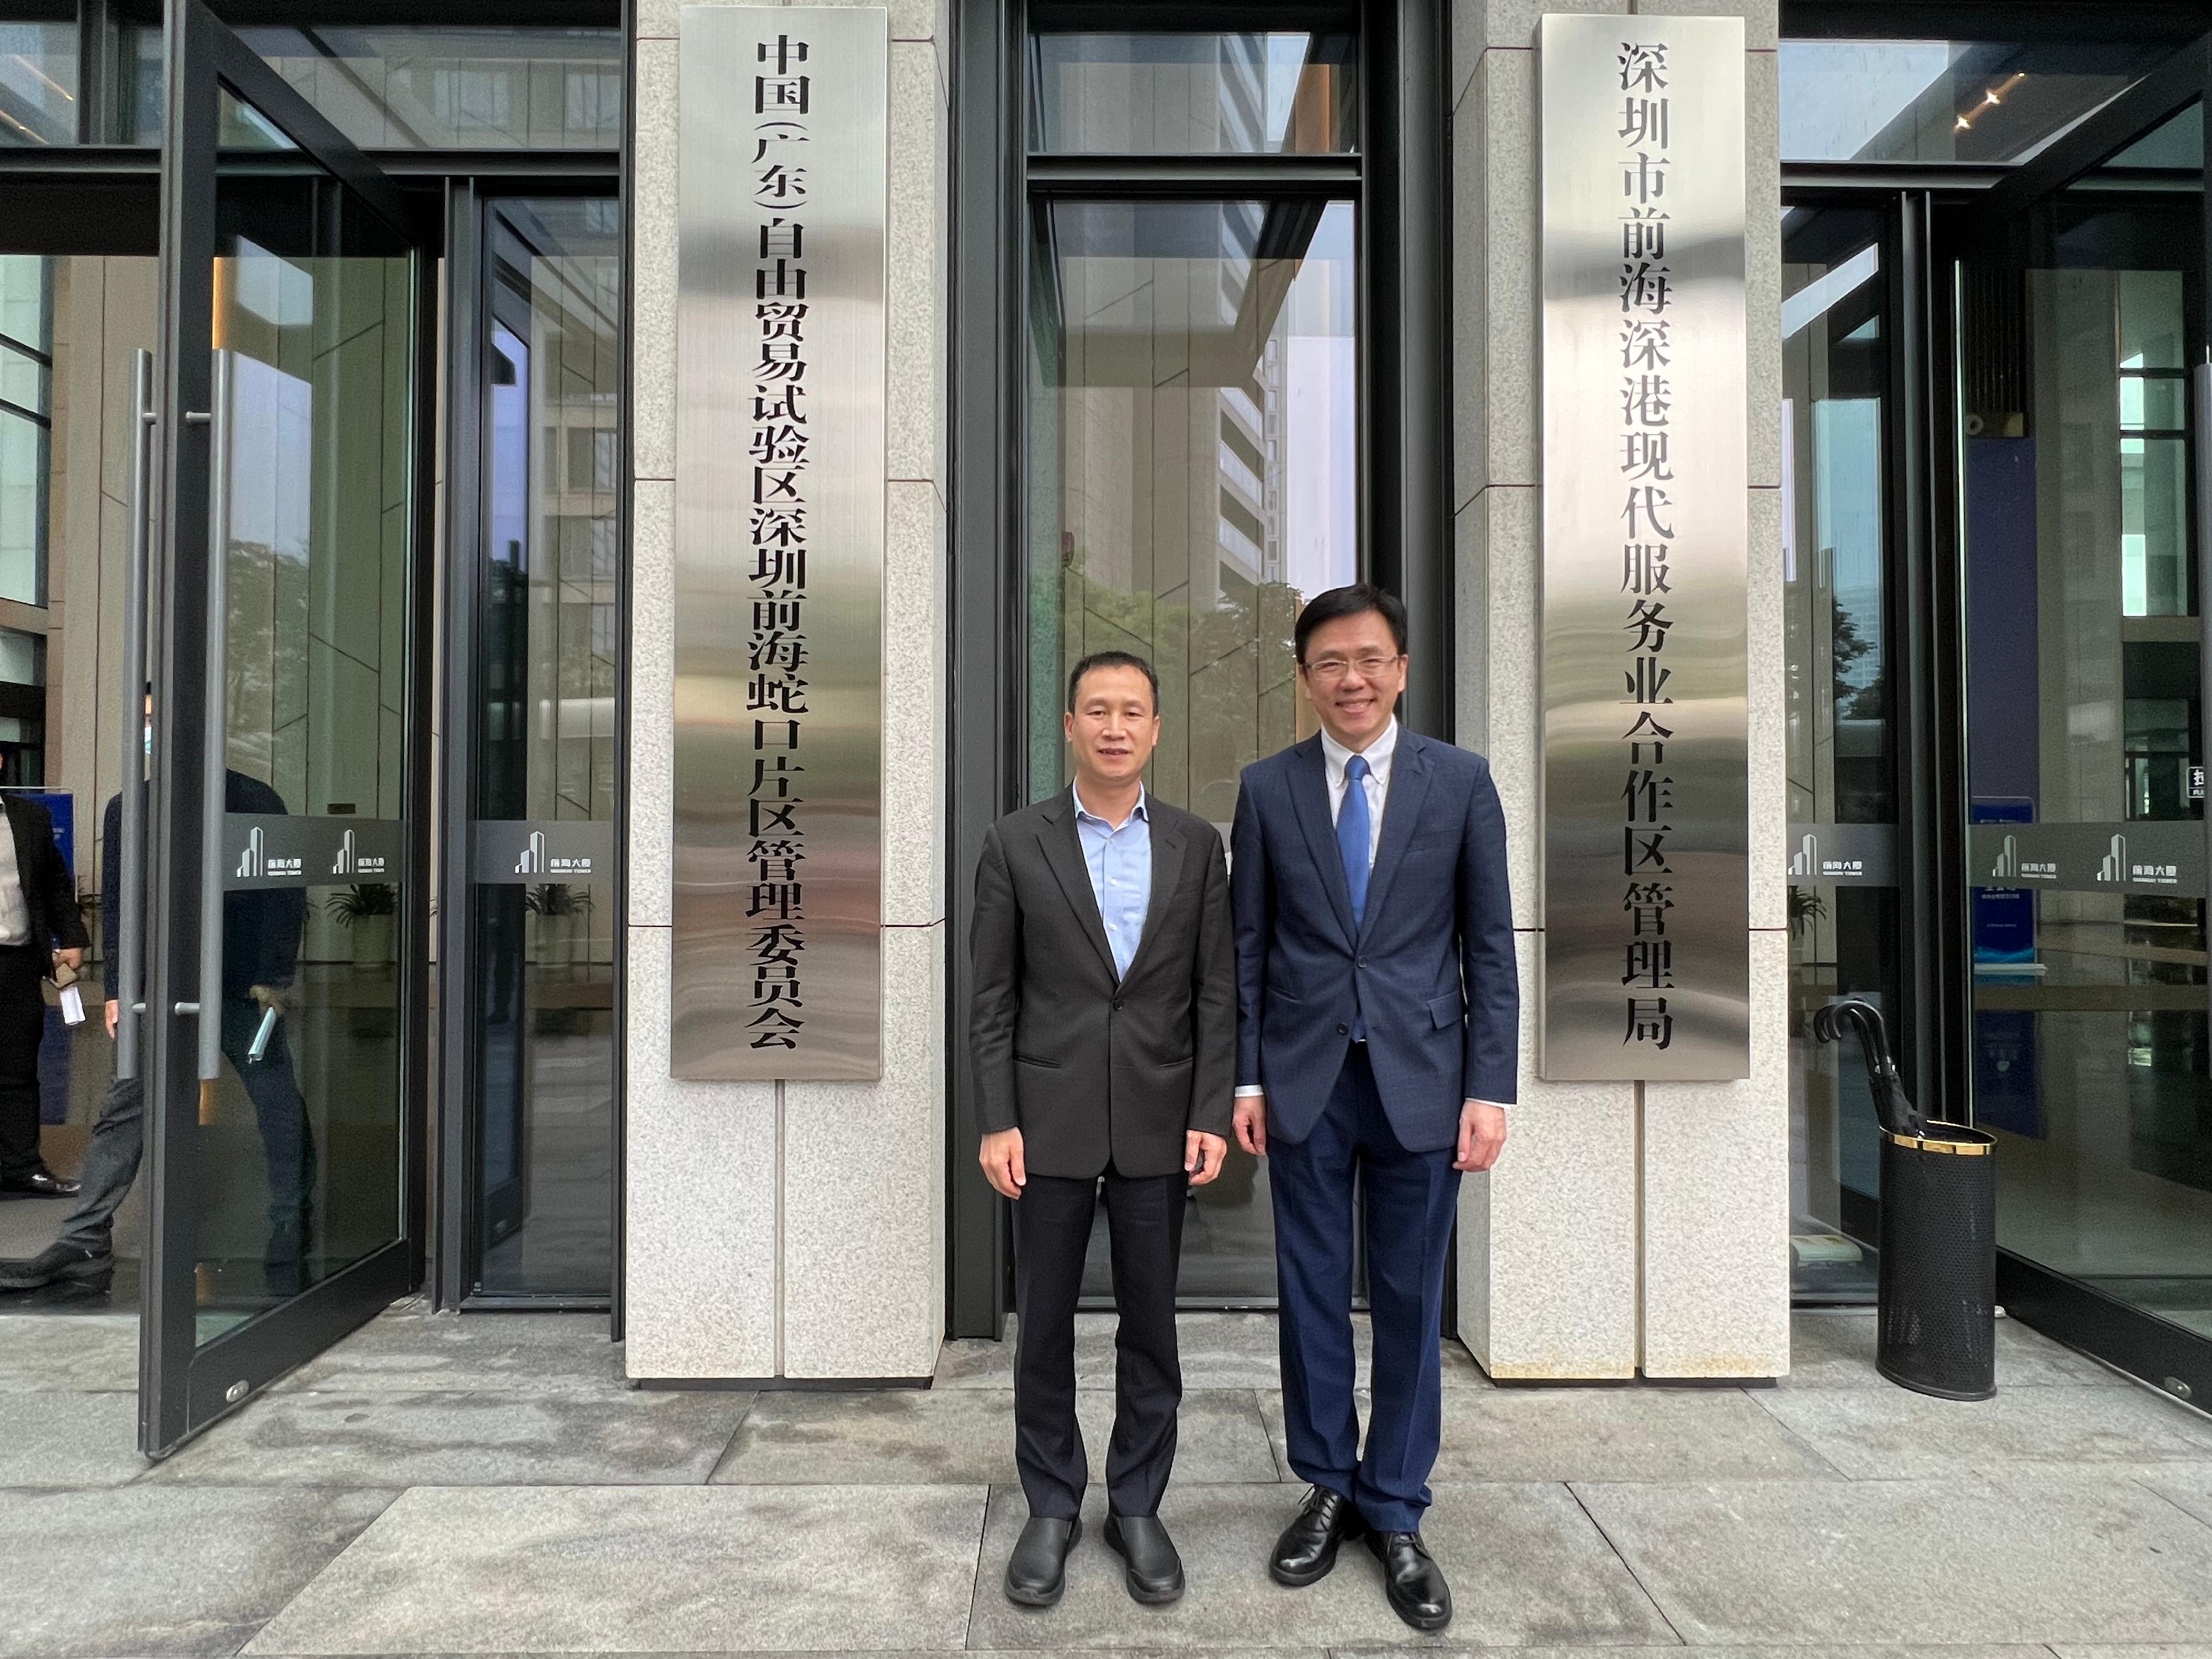 The Secretary for Innovation, Technology and Industry, Professor Sun Dong (right), meets with Member of the Standing Committee of the Shenzhen Municipal Committee of the Chinese Communist Party Mr Zeng Pai (left) in Qianhai today (March 30) to exchange views on strengthening the linkage with Qianhai.